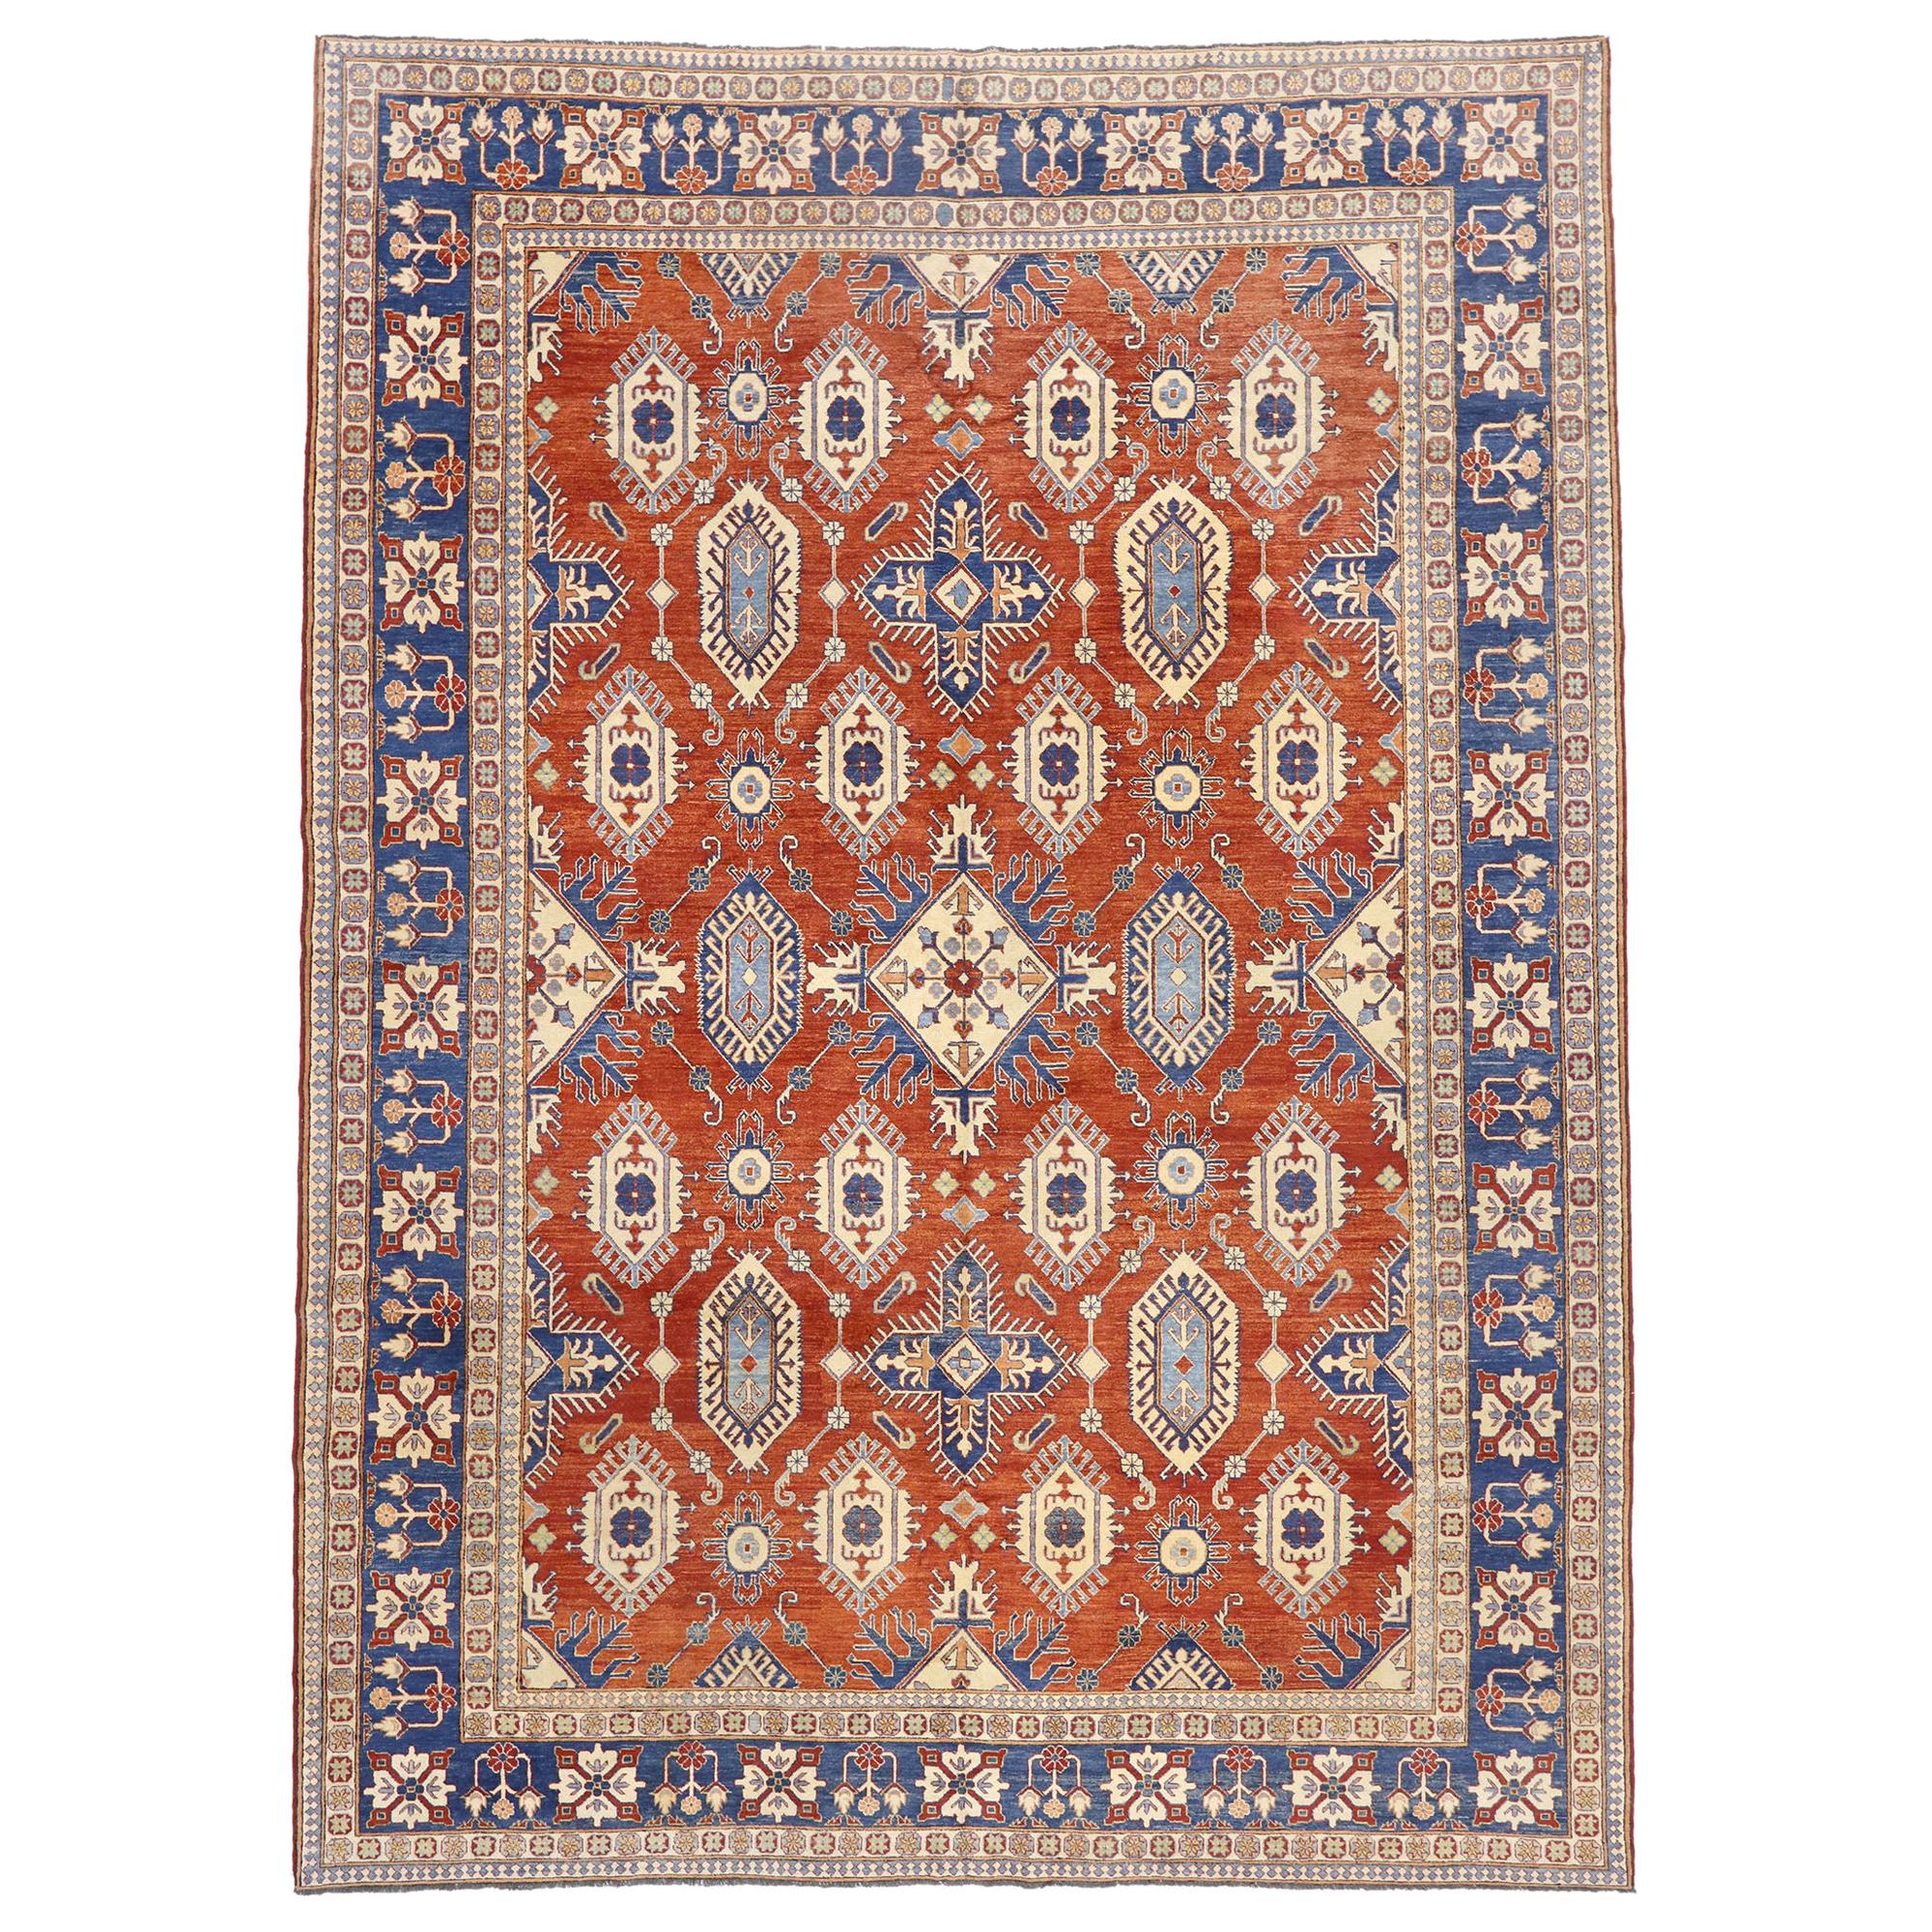 Vintage Persian Shiraz Afghani Rug with Modern Colonial and Federal Style